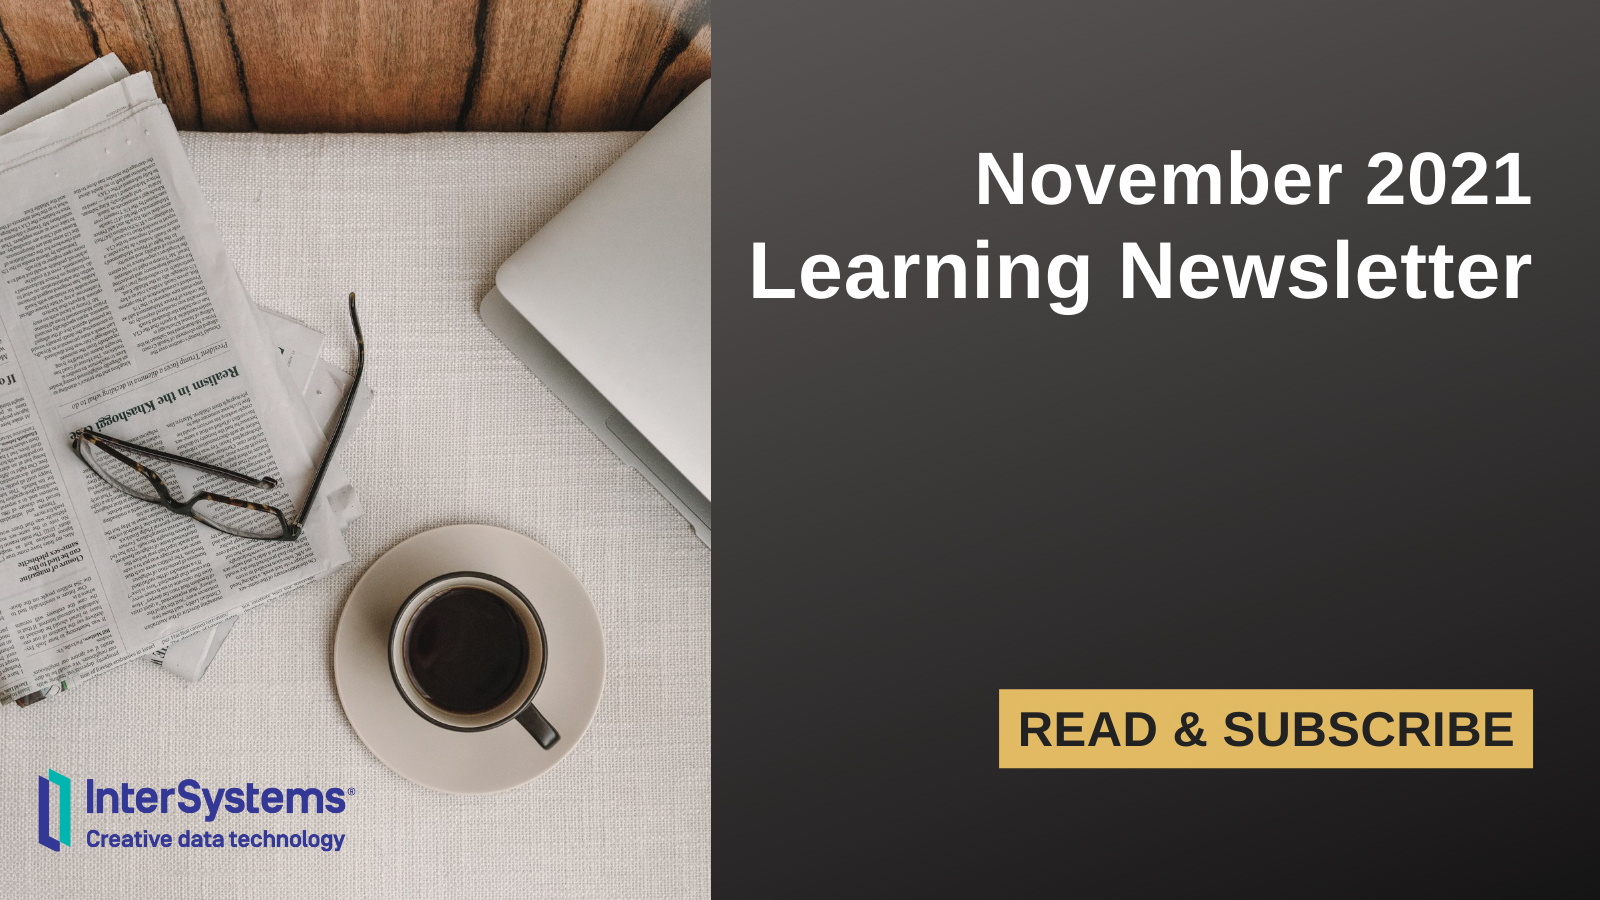 November 2021 Learning Newsletter: Read and Subscribe